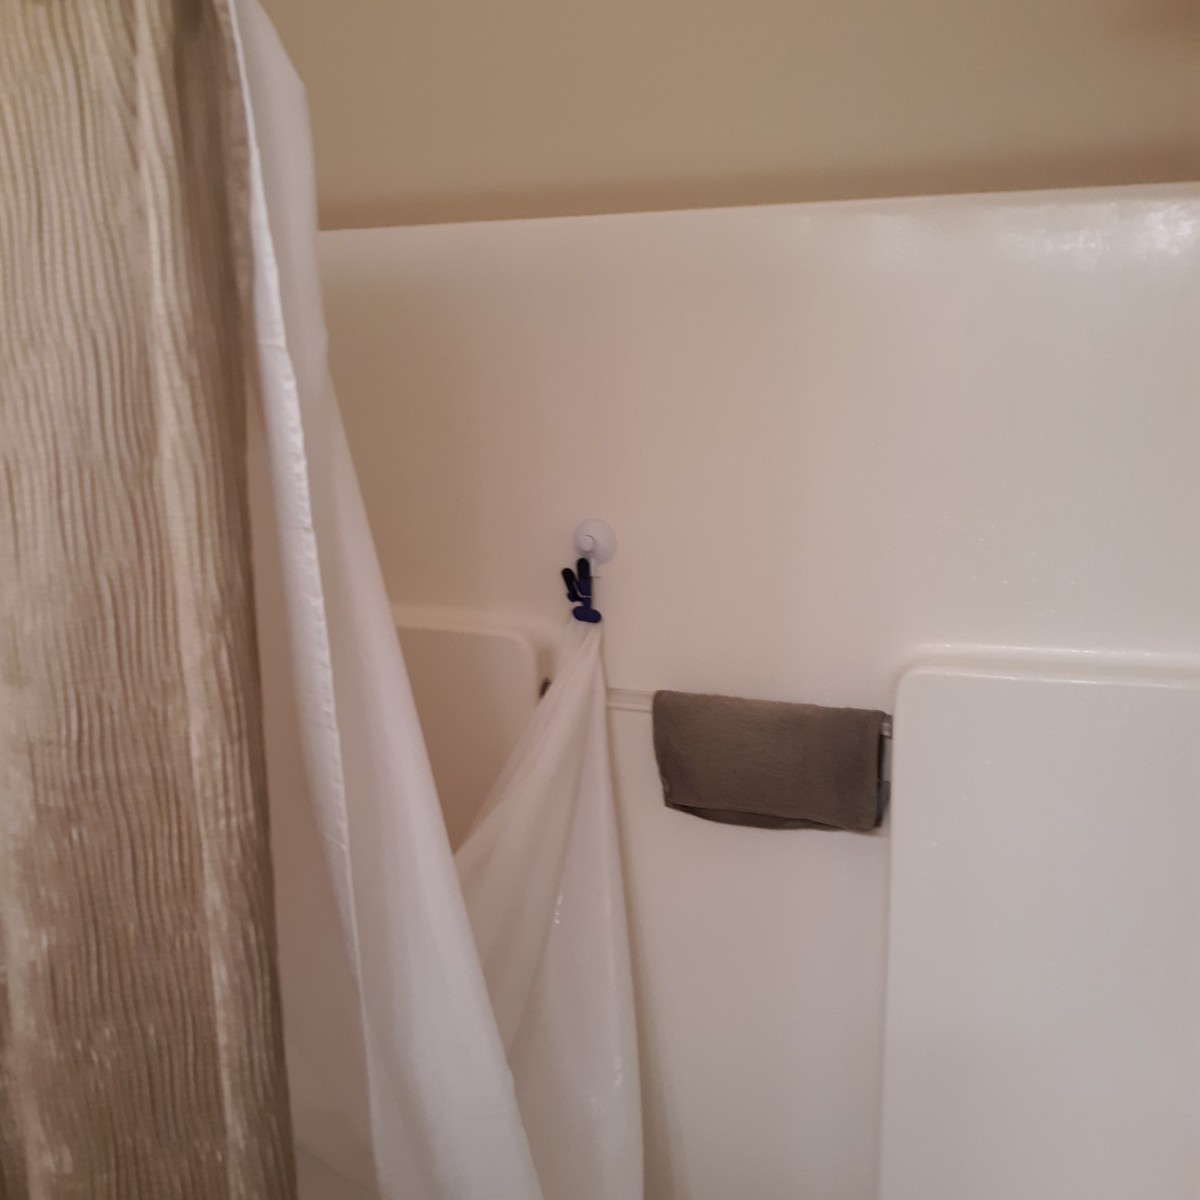 Mildew On Shower Curtain Liners, How To Clean Mold Off Of Shower Curtain